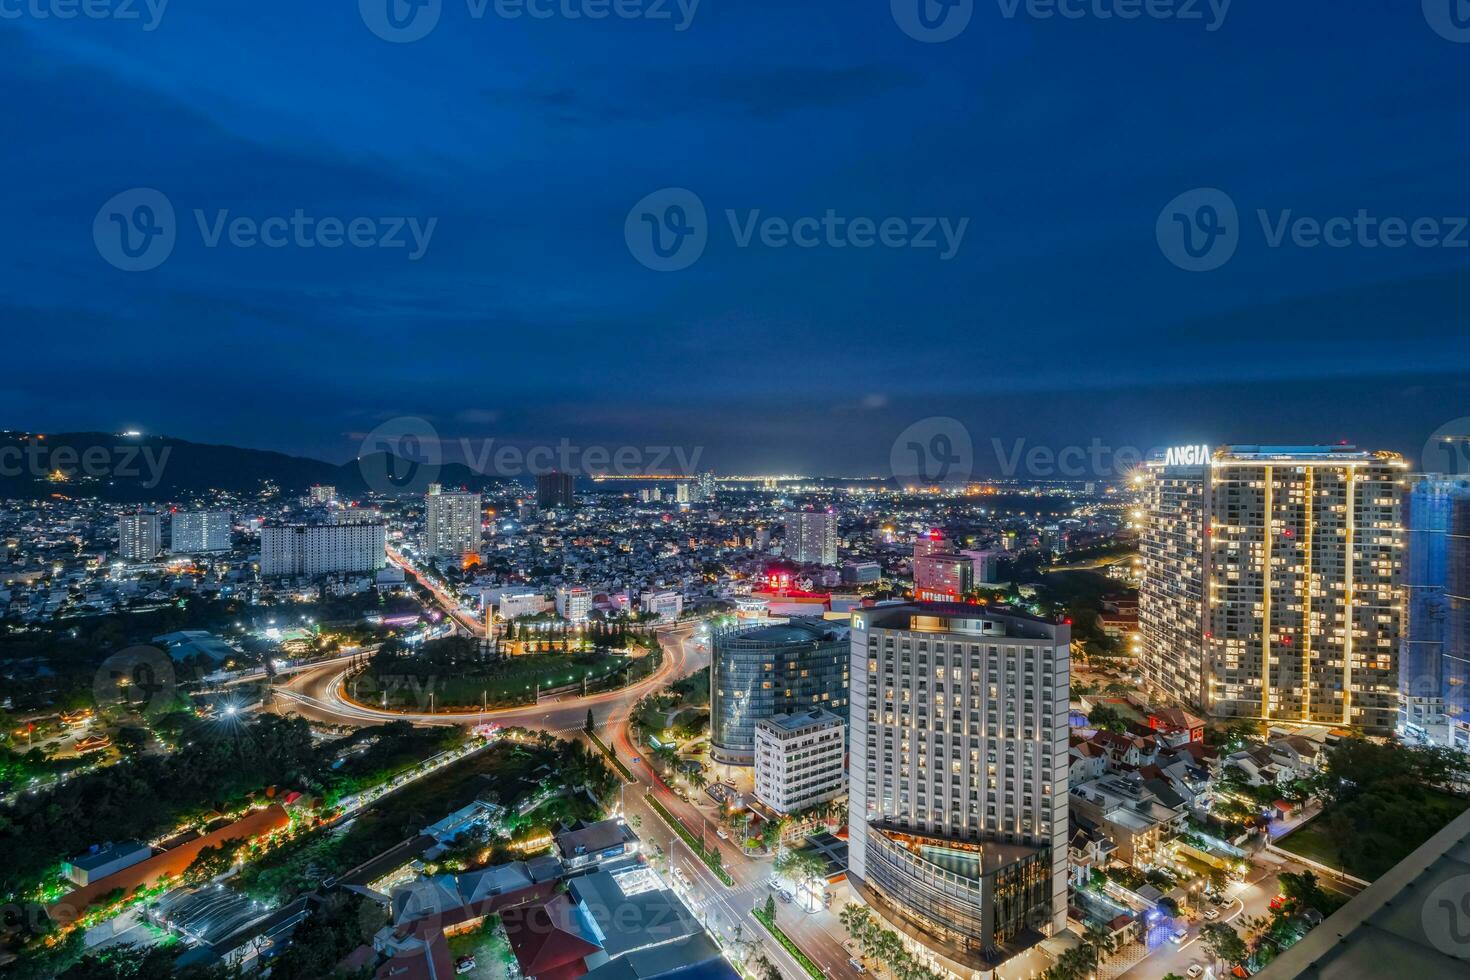 Night in Vung Tau city and coast, Vietnam. Vung Tau is a famous coastal city in the South of Vietnam photo